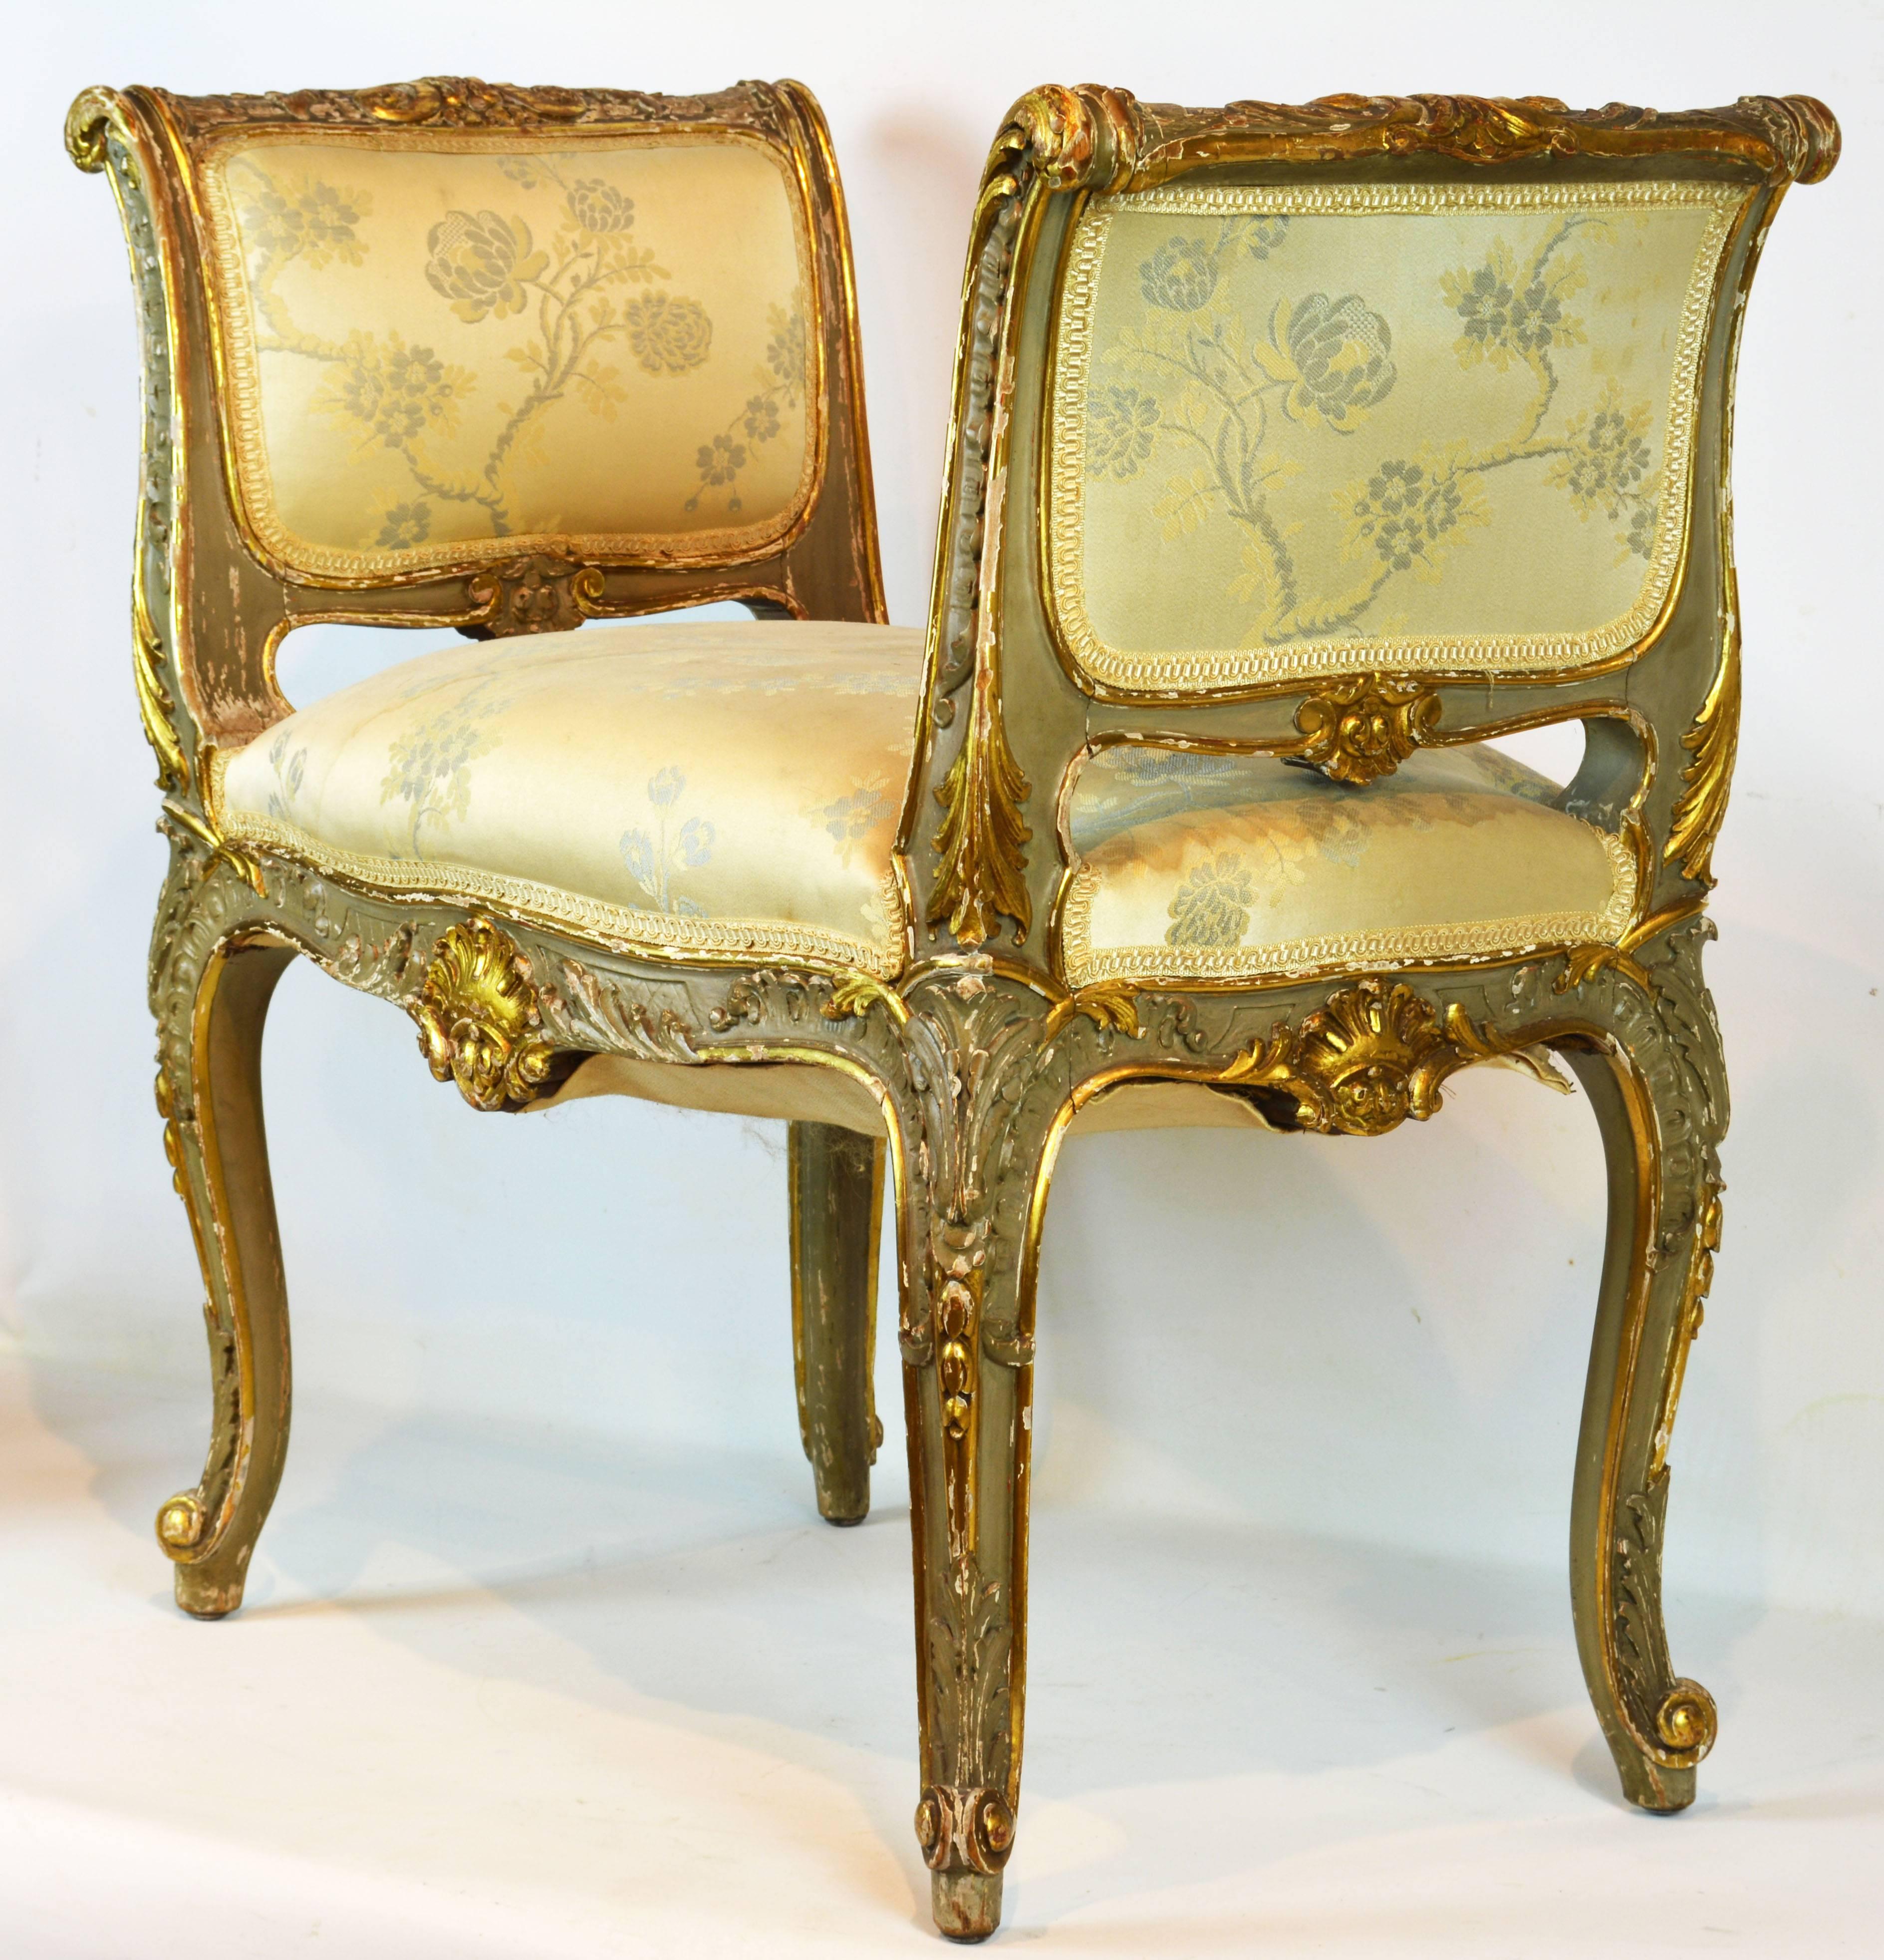 Painted 19th Century French Louis XV Style Carved Paint and Parcel-Gilt Window Bench